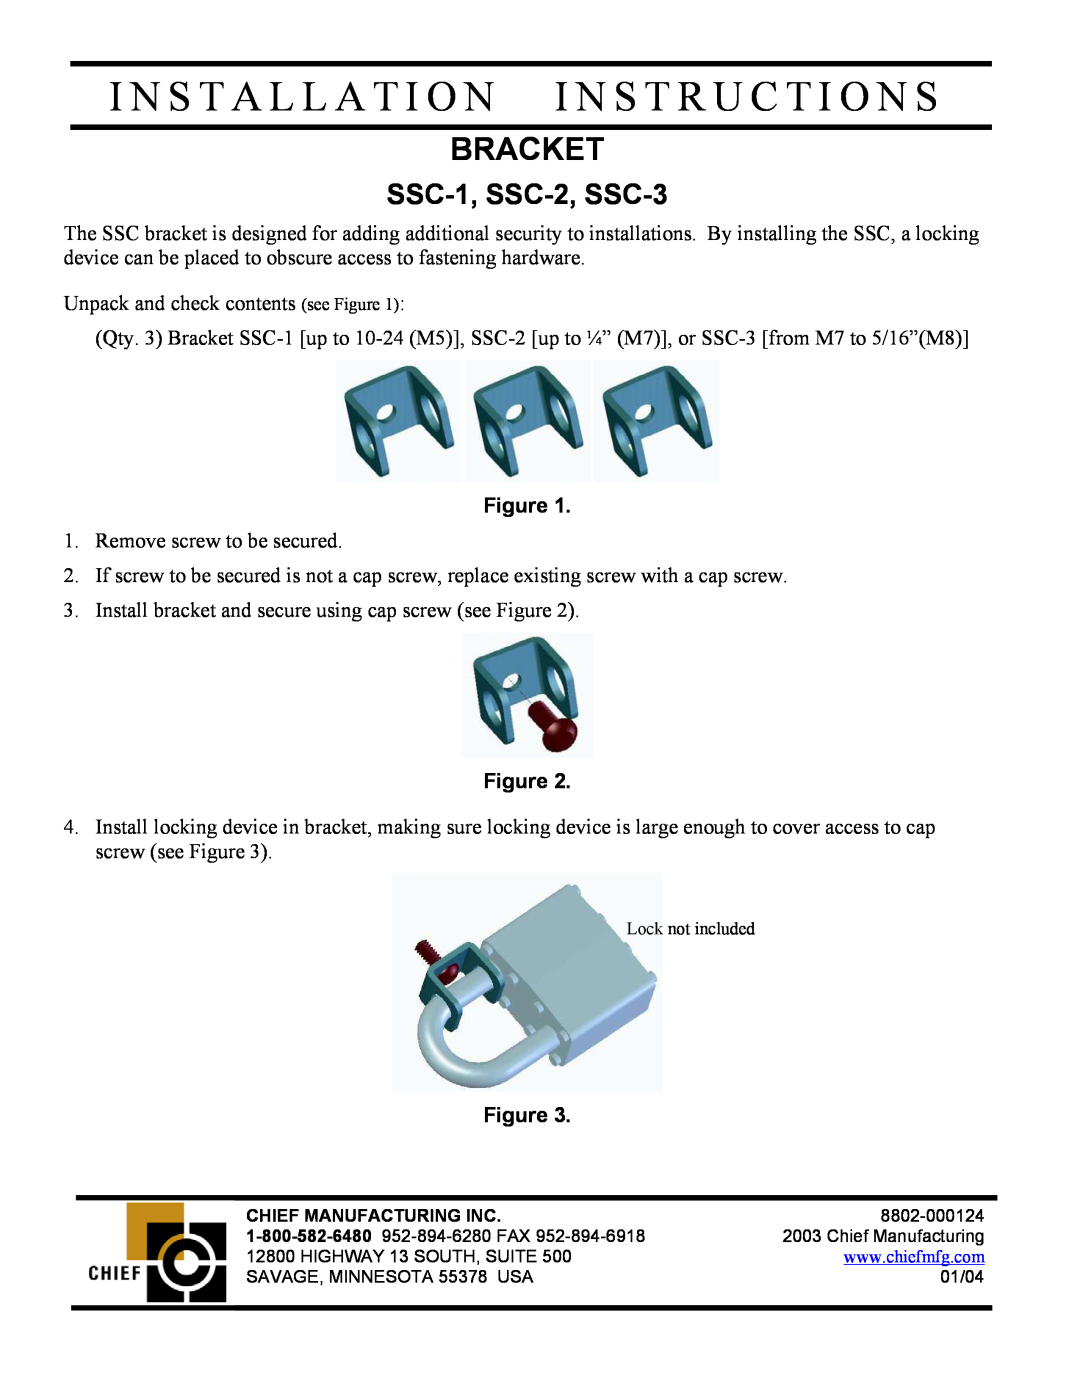 Chief Manufacturing SSC-1, SSC-3, SSC-2 installation instructions I N S T A L L A T I O N I N S T R U C T I O N S, Bracket 